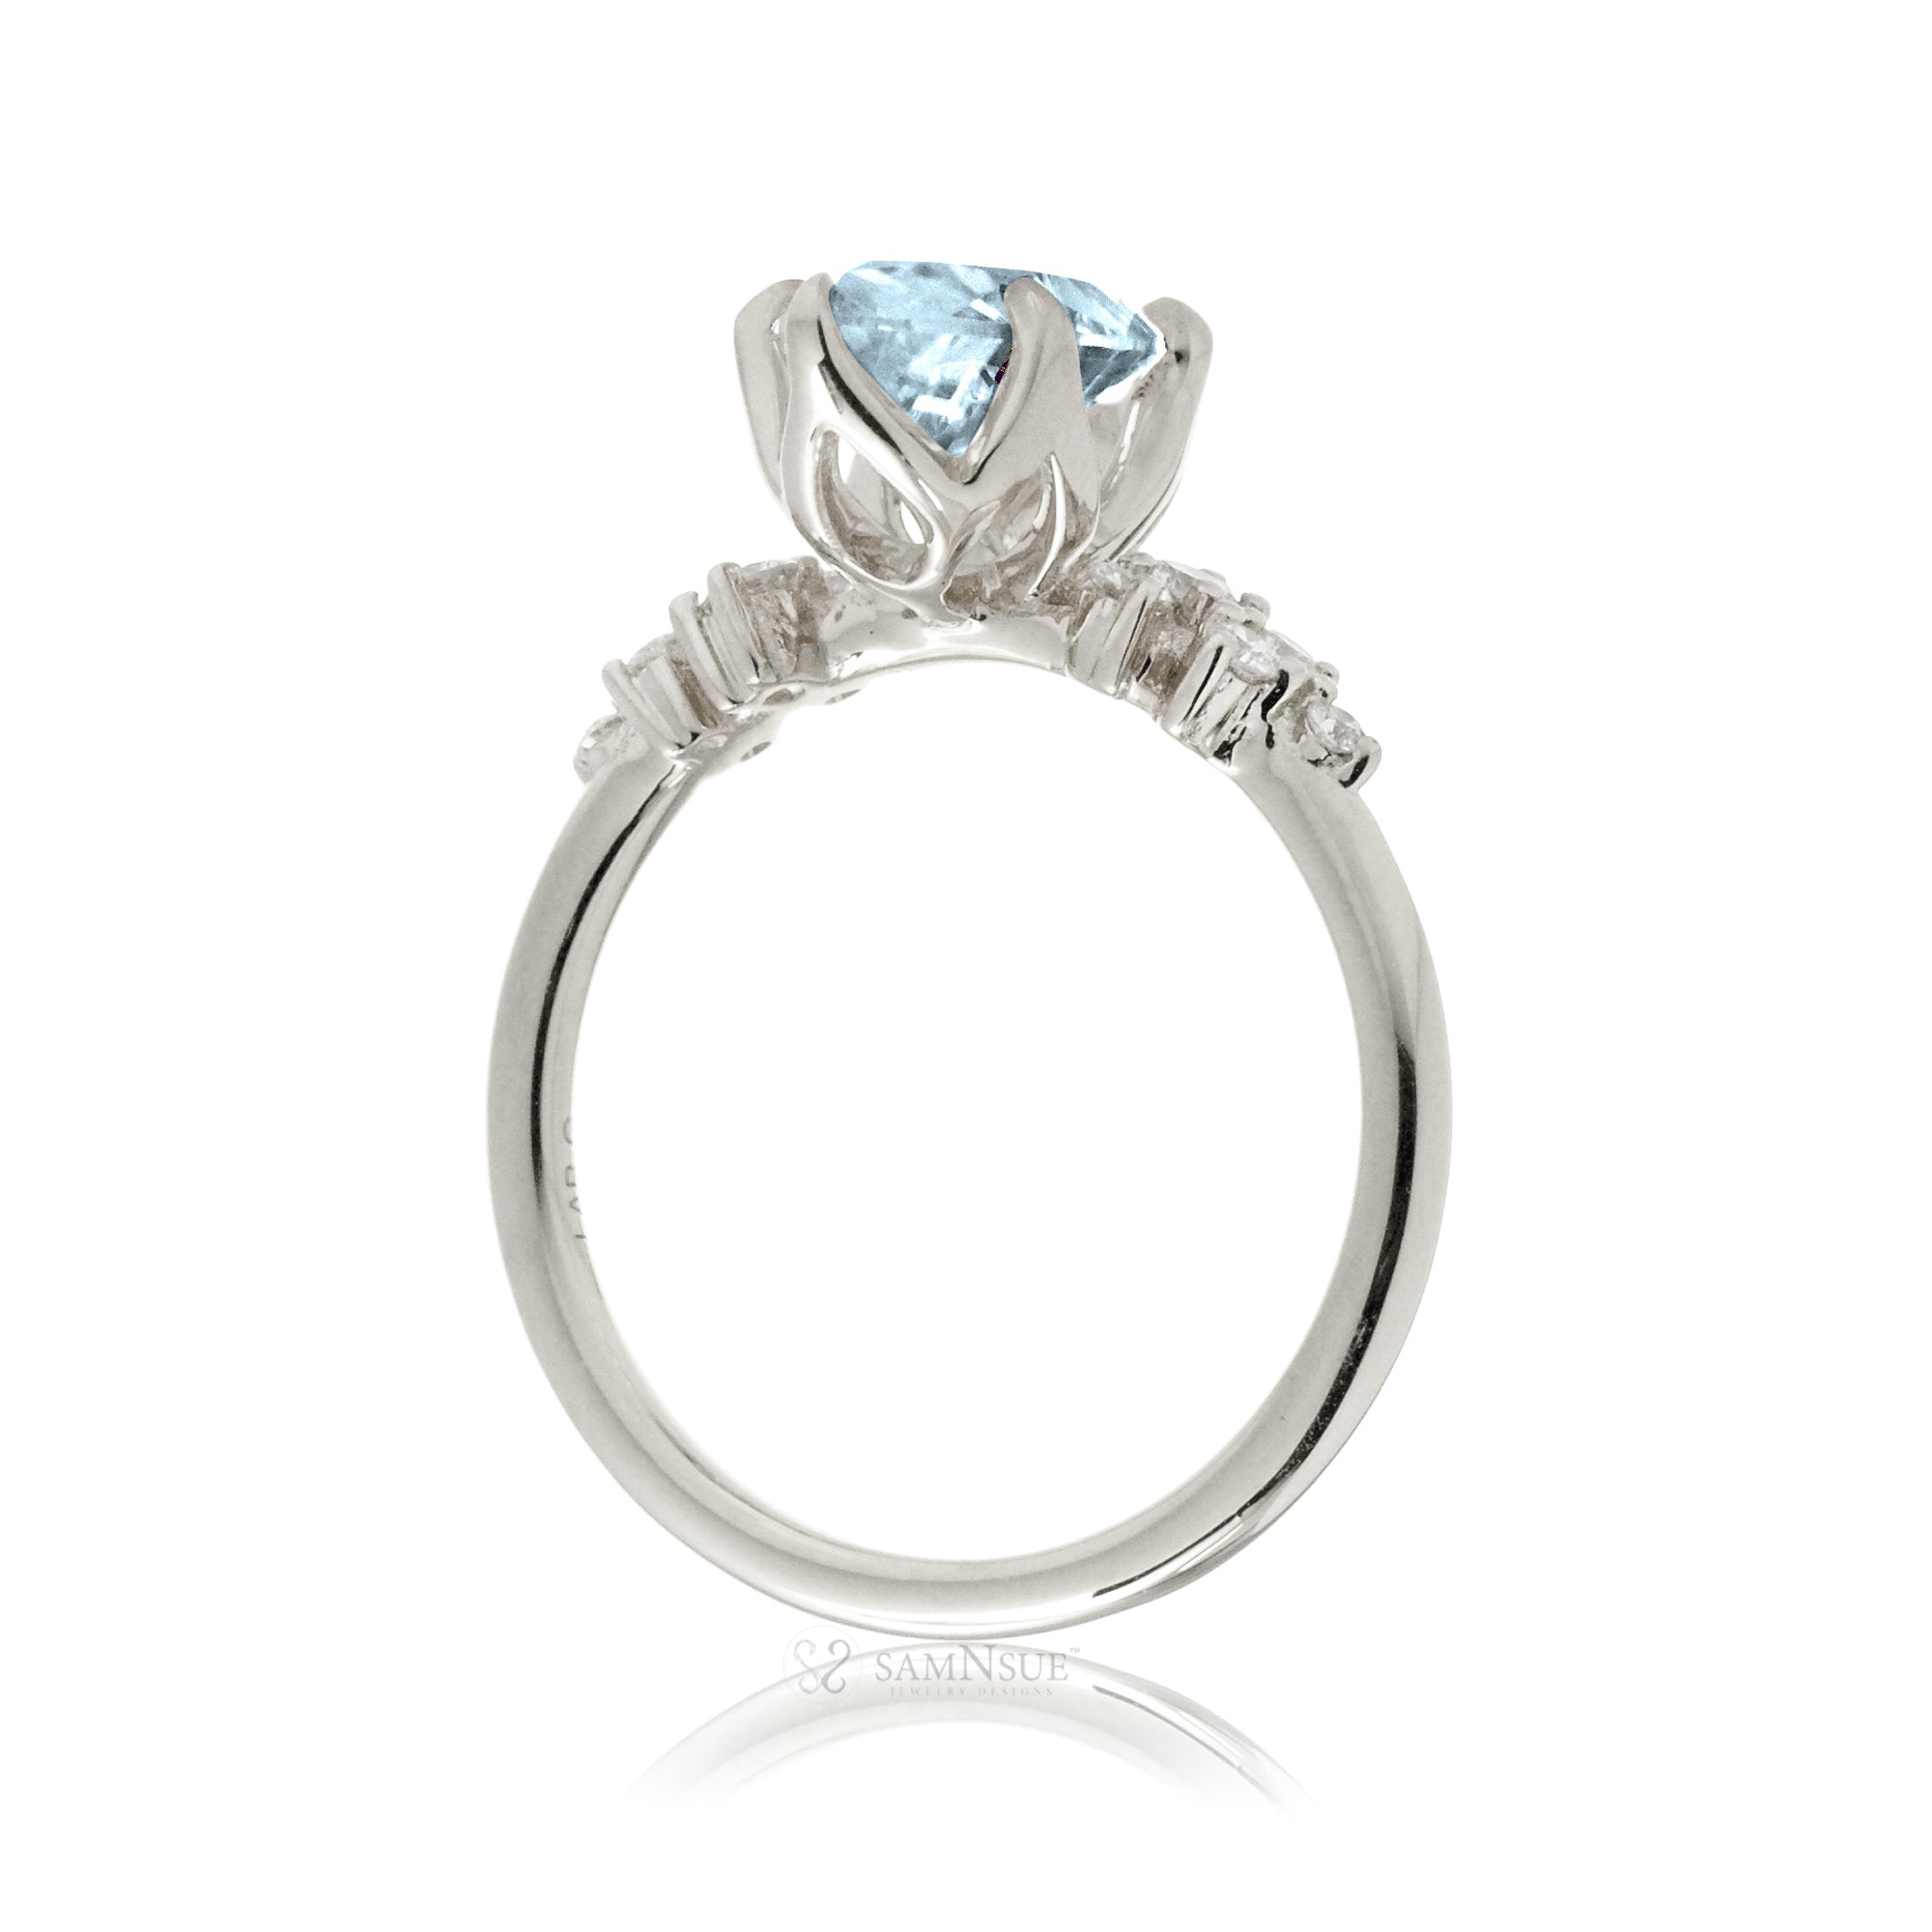 Aquamarine ring with oval center stone and side accent diamonds in white gold